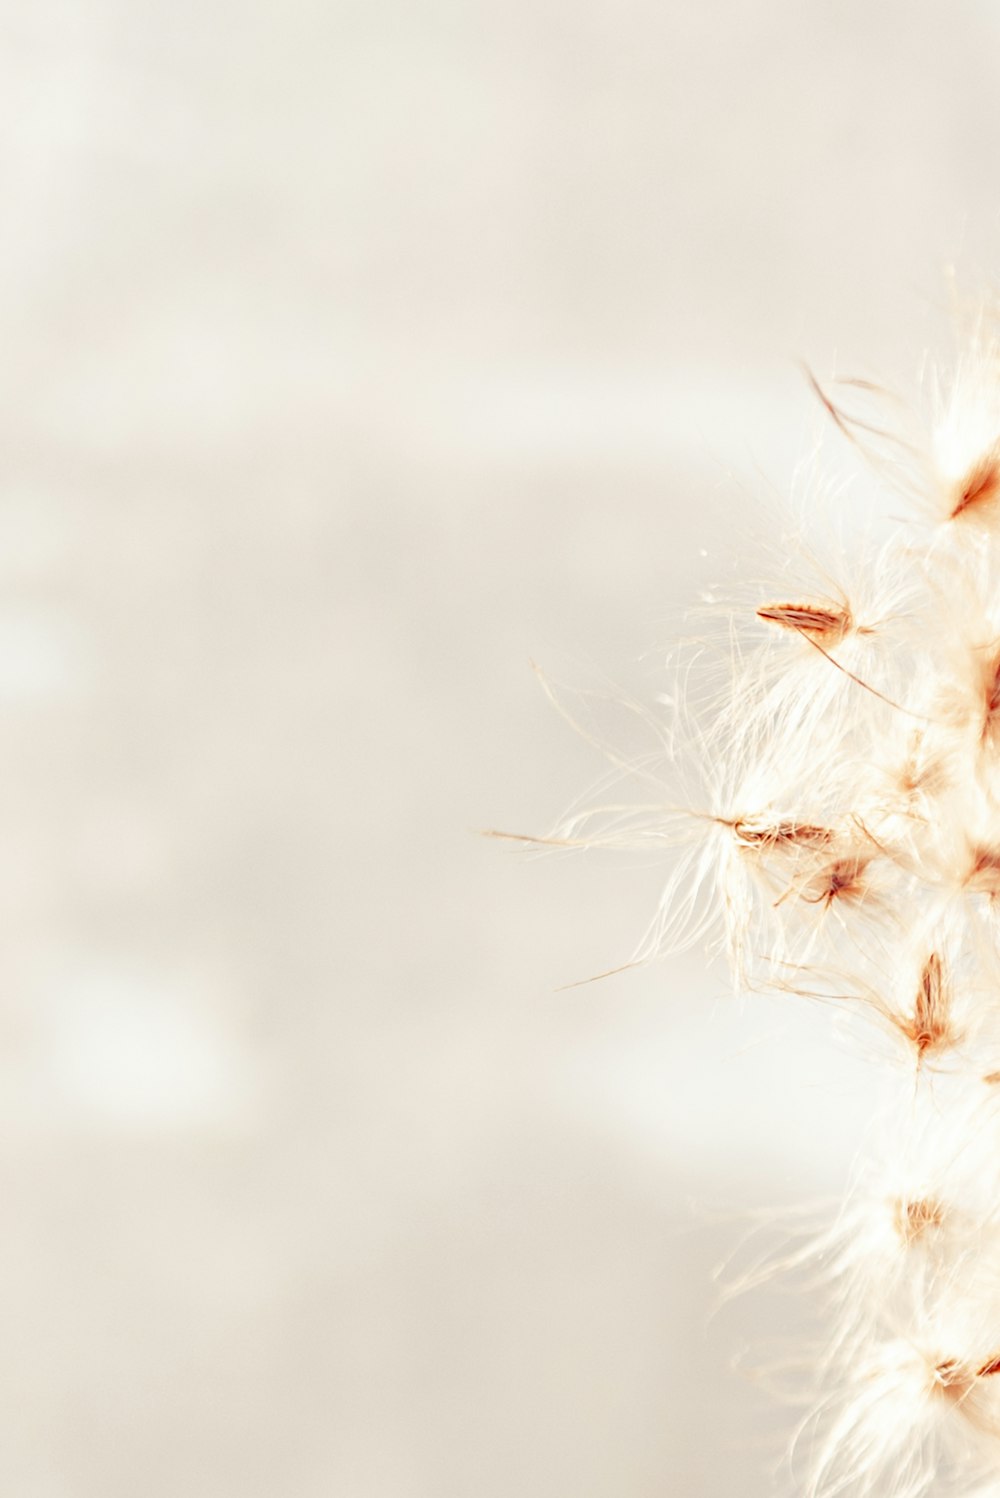 a close up of a dandelion on a white background